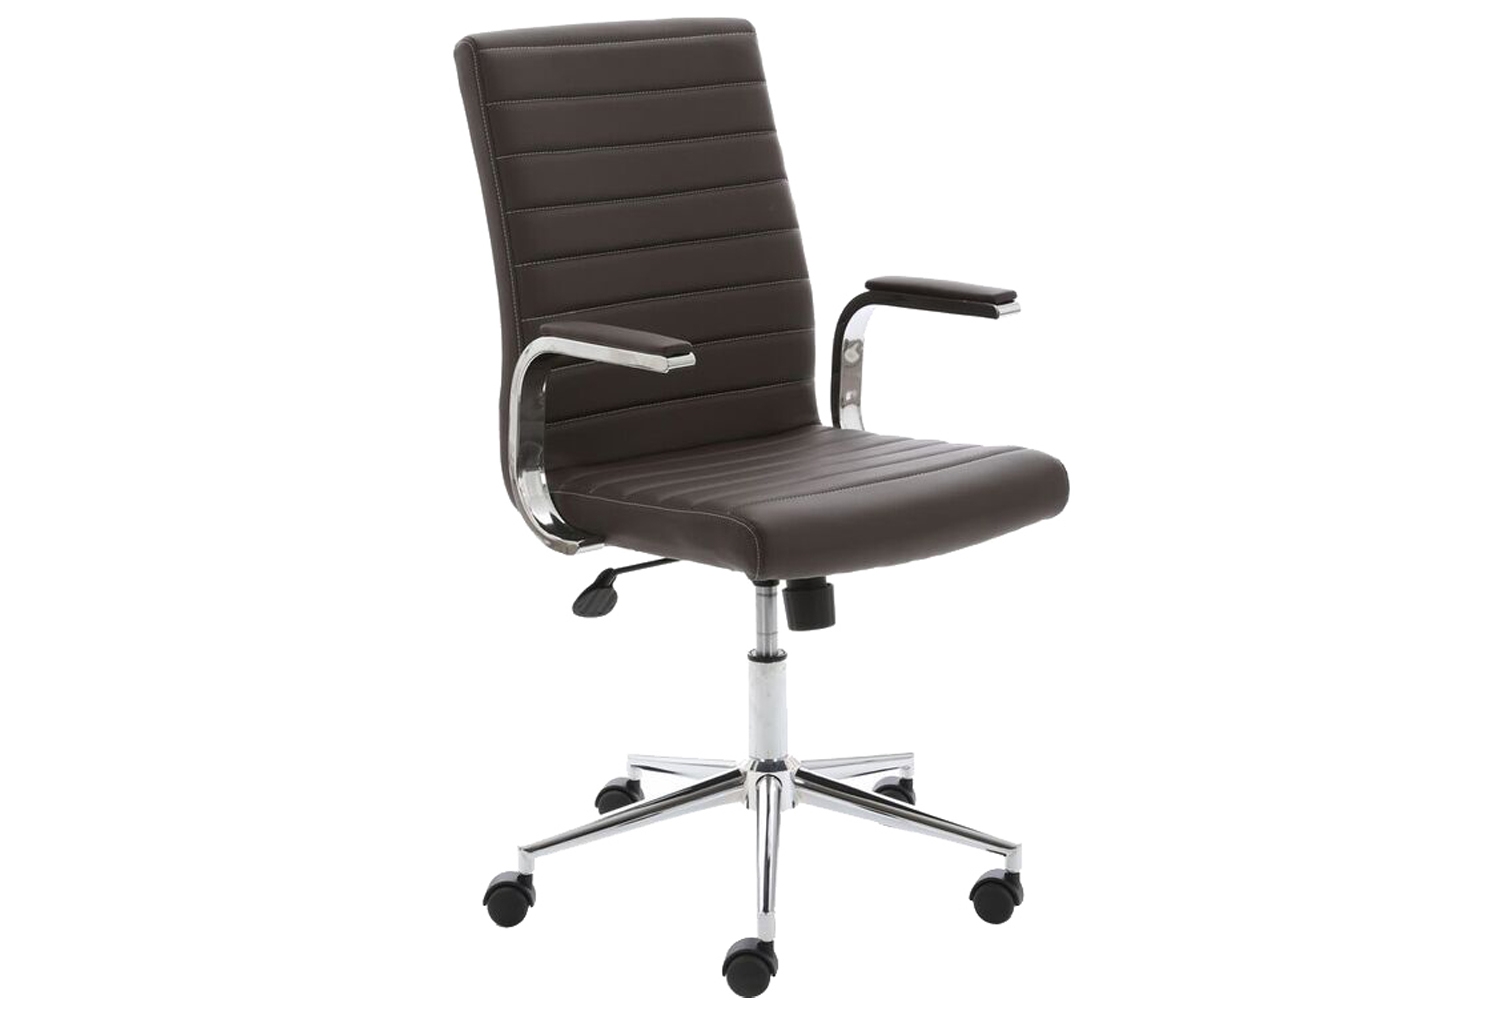 Wexford Executive Bonded Leather Office Chair (Brown)